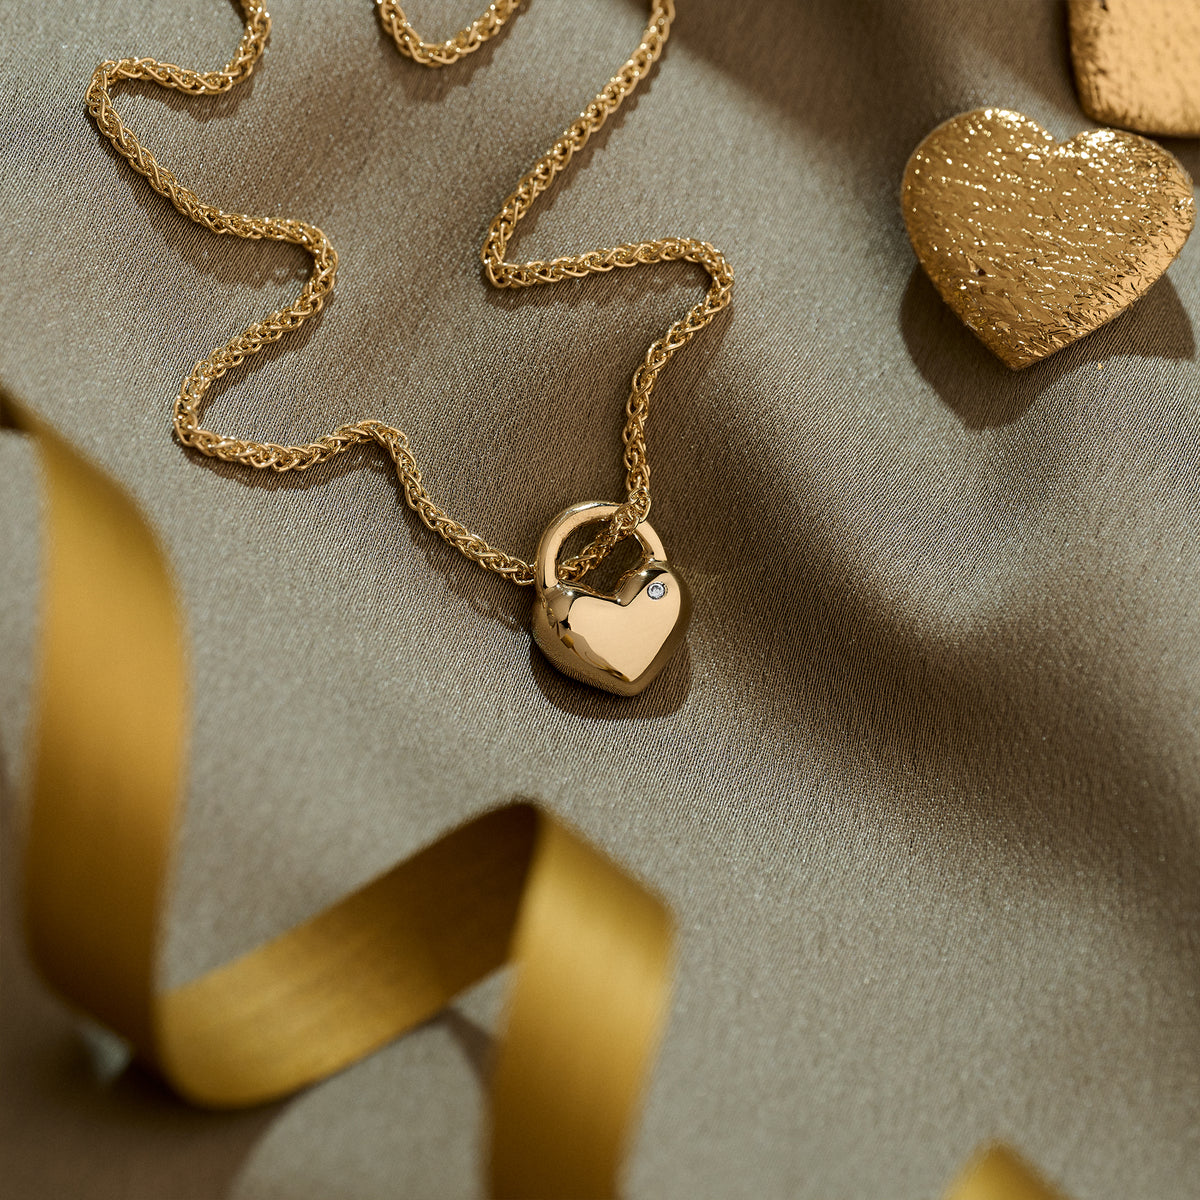 solid gold rounded heart necklace set with diamond on heavier gold spiga wheat chain